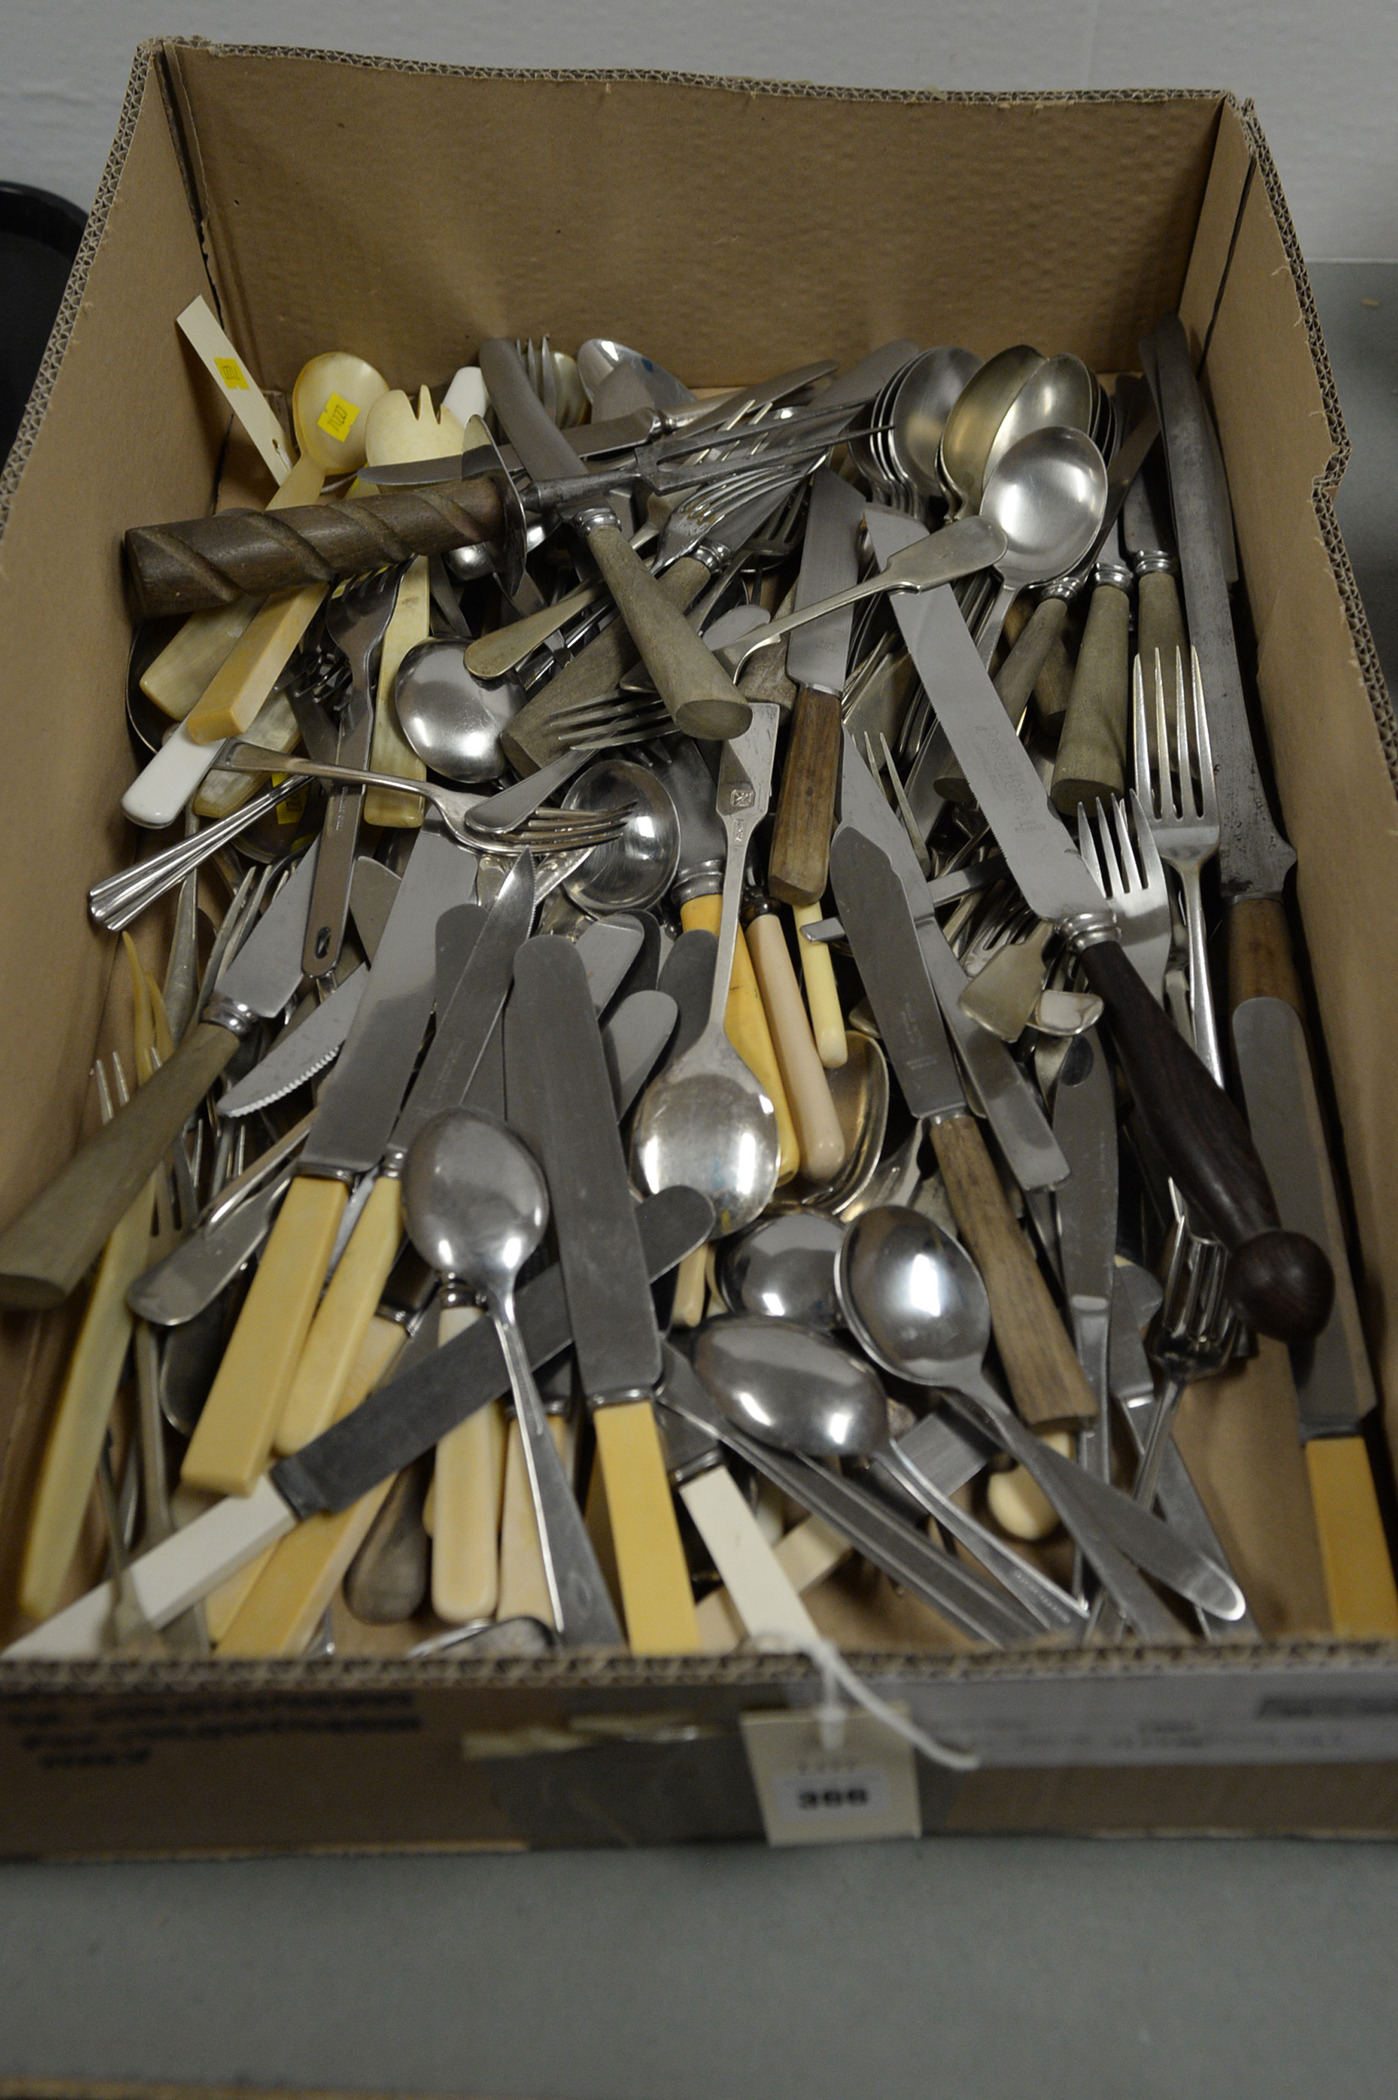 Silver plate and stainless steel cutlery